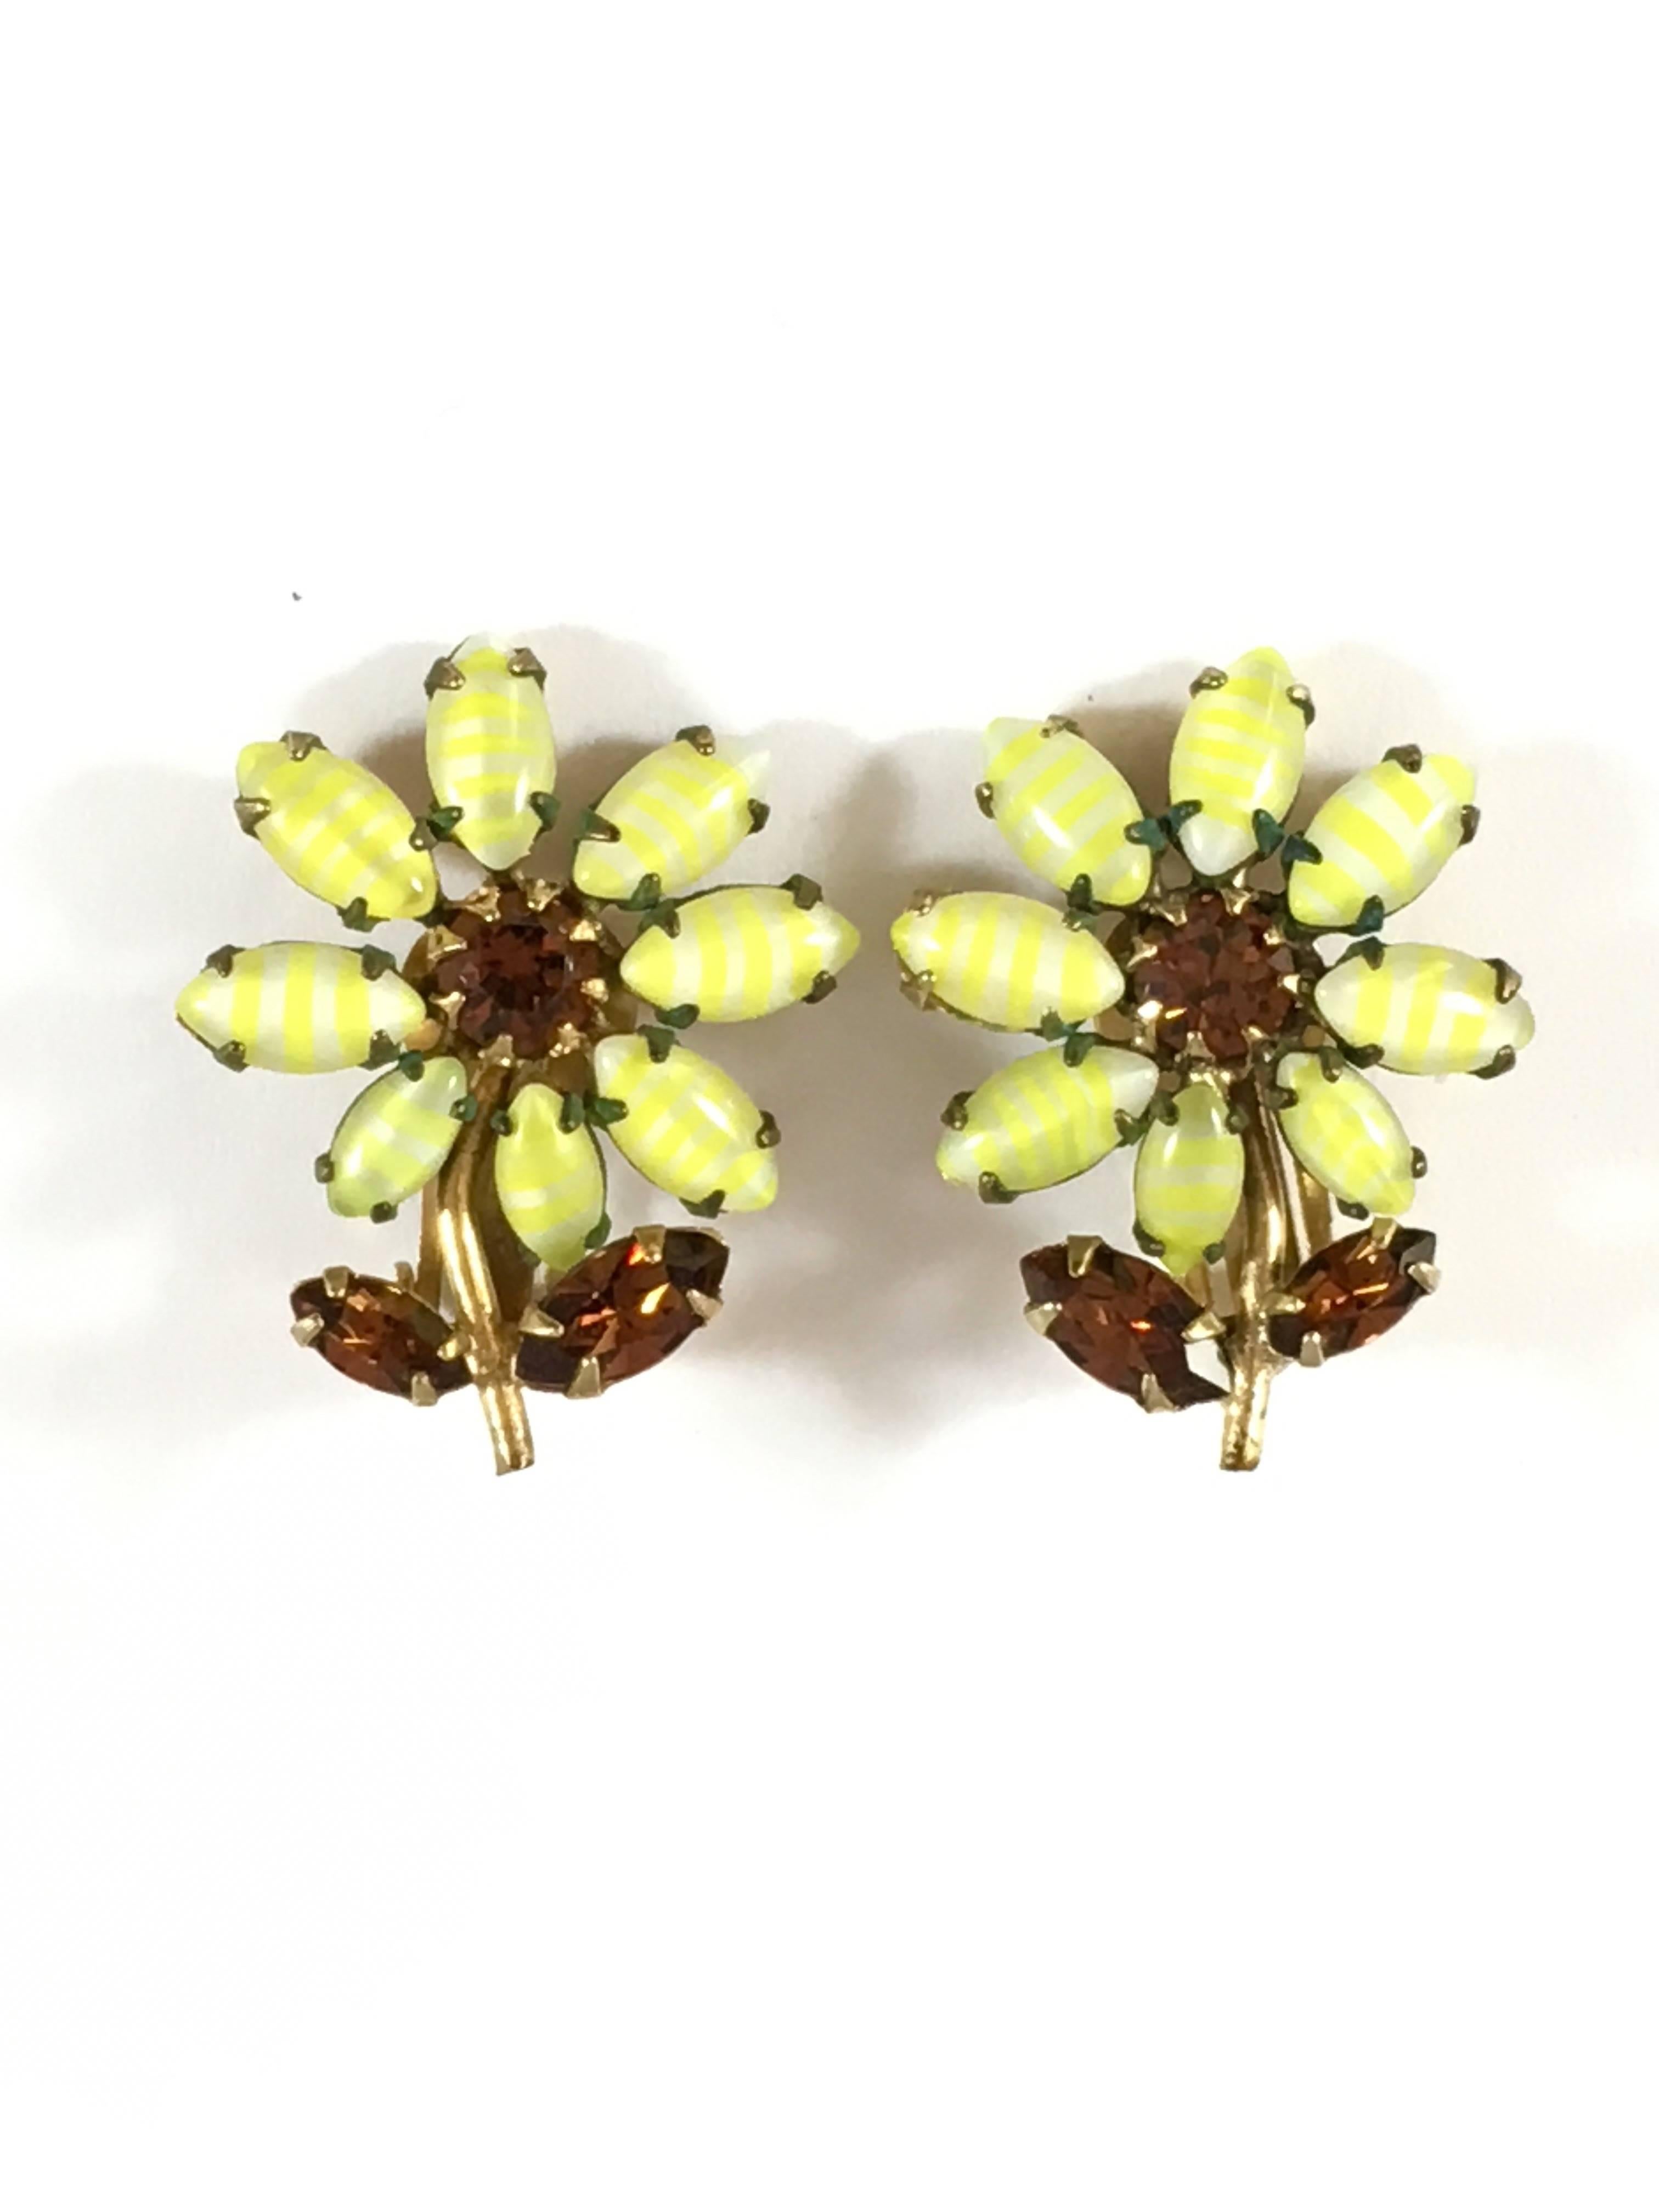 These are a pair of beautifully 1950s yellow flower clip-on earrings. Unsigned but most certainly made by Schreiner. They have Schreiner's signature earring clip backs and the stones are set prong-side up - another Schreiner signature. The flowers'